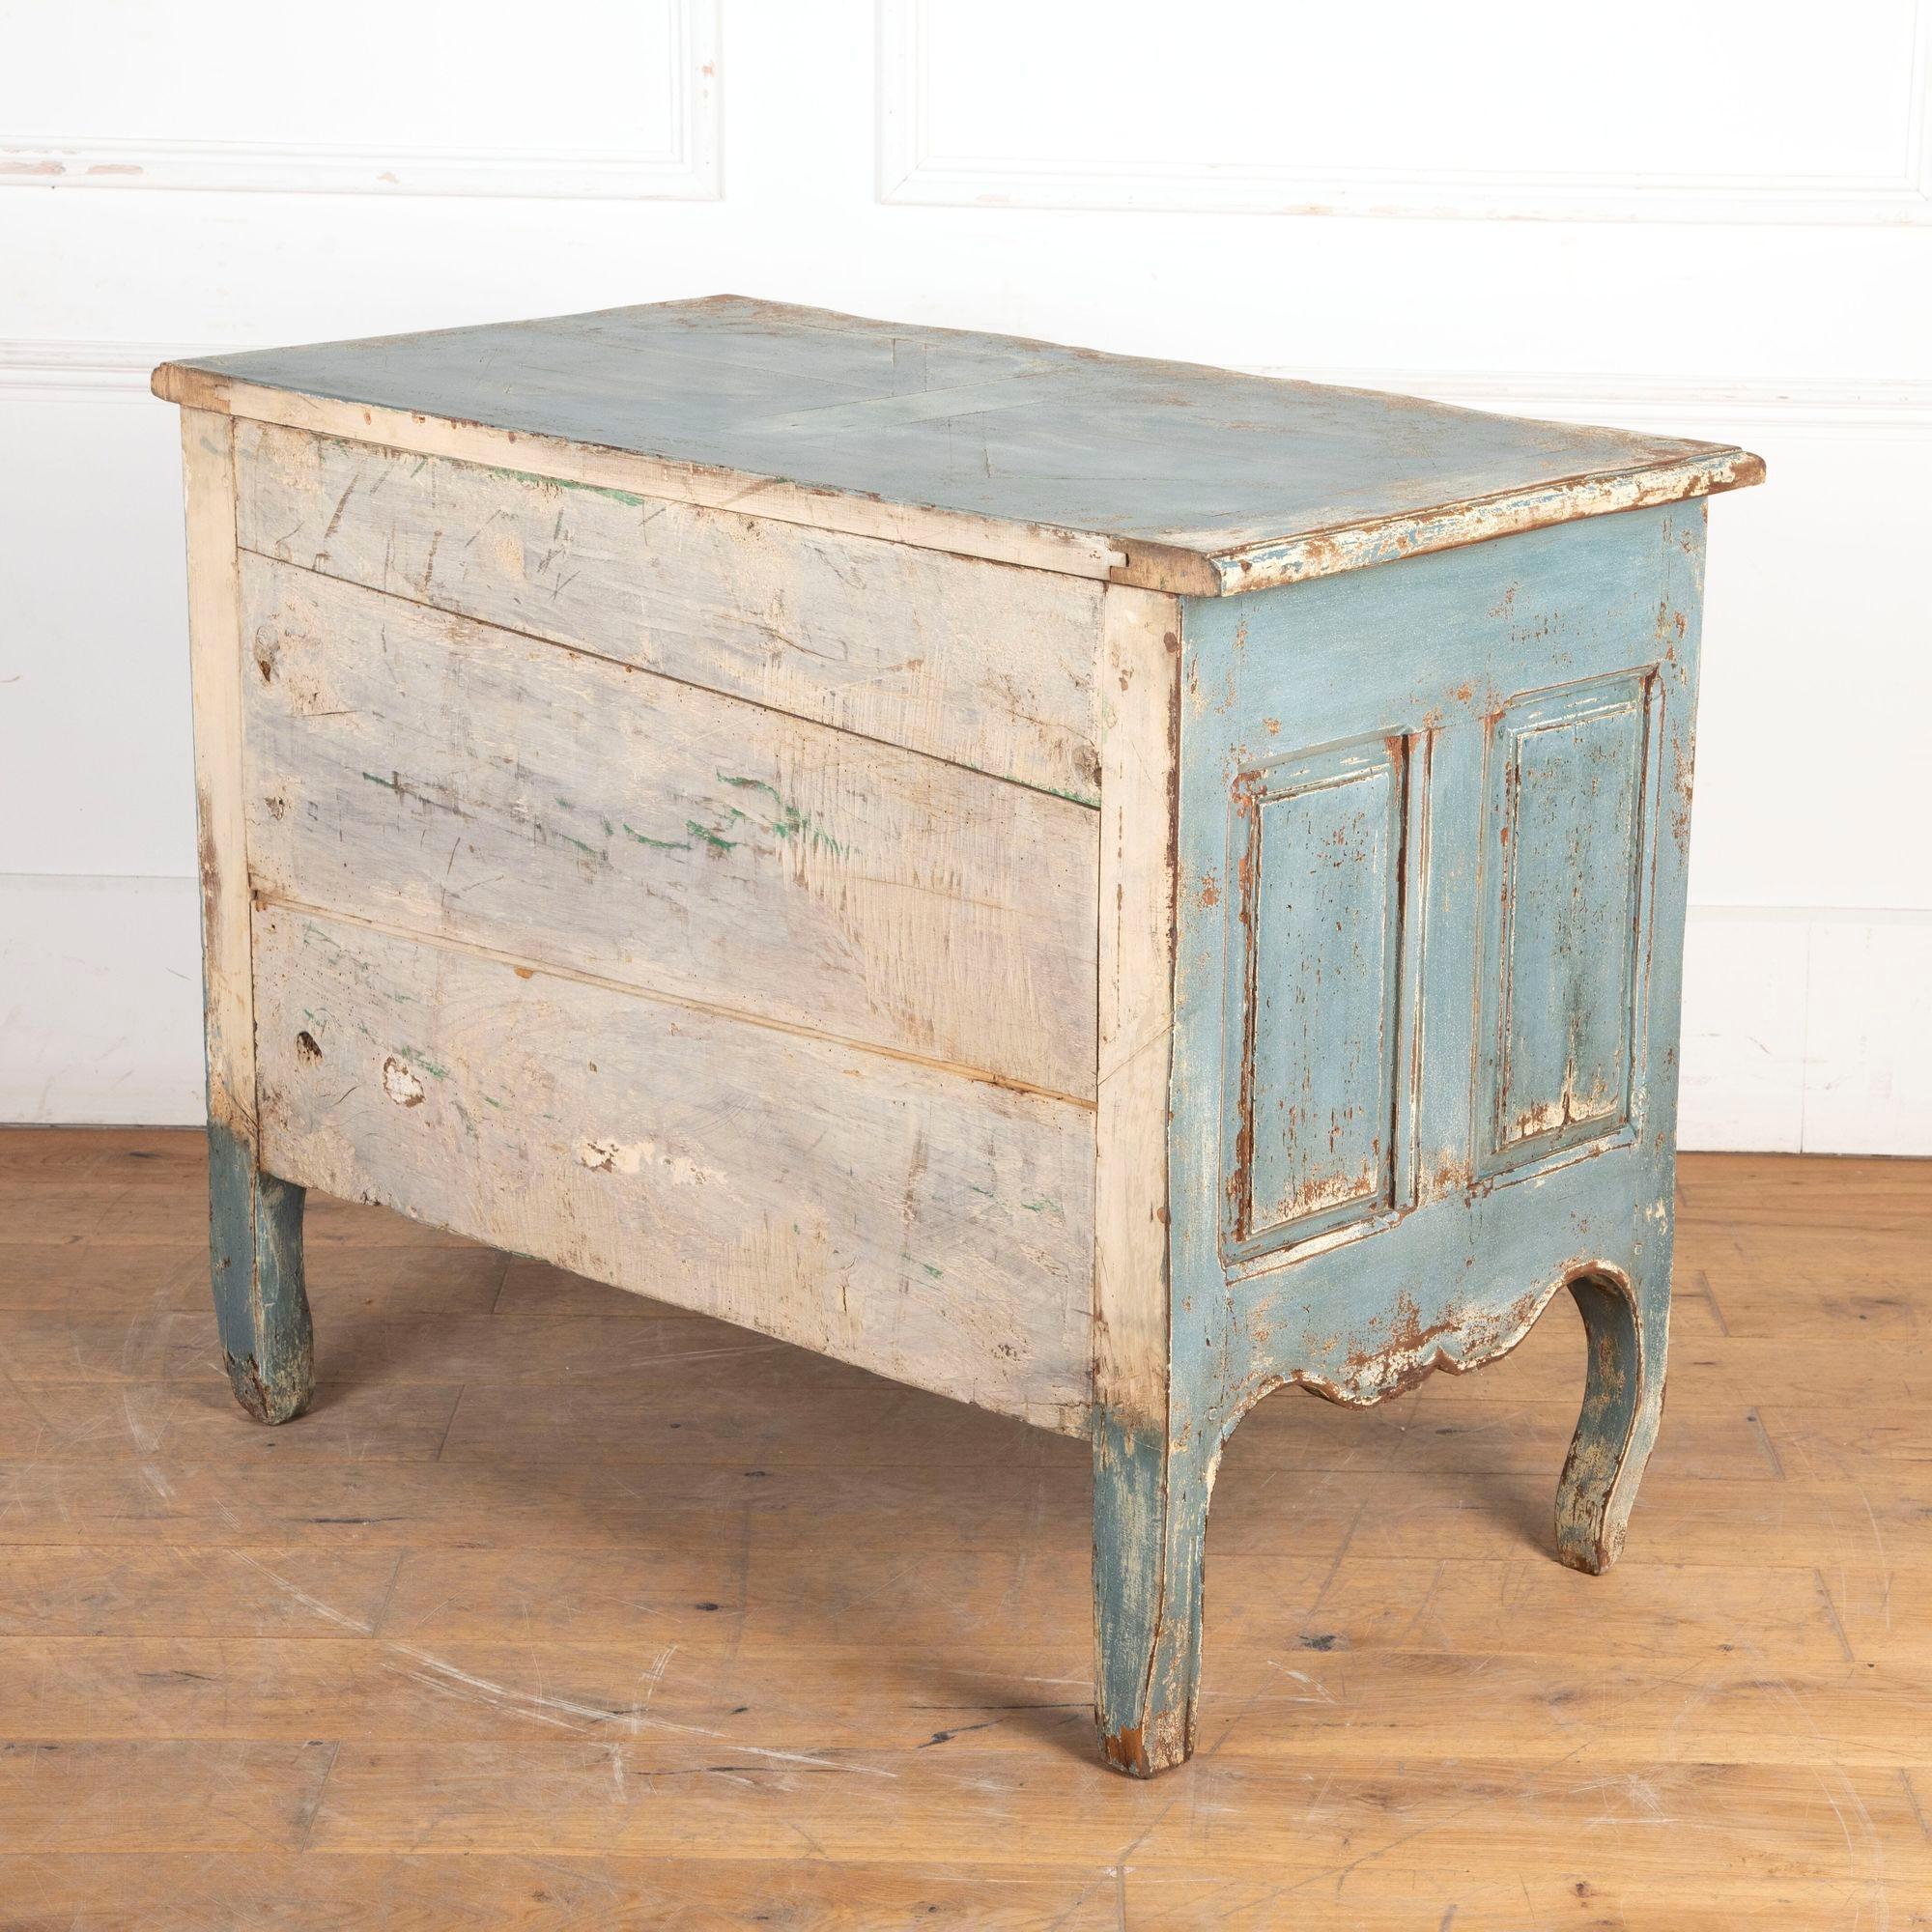 Shapely and robust 18th Century French two-drawer commode with brass handles, escutcheons, and key.
The distressed blue and cream finish has been a later addition.